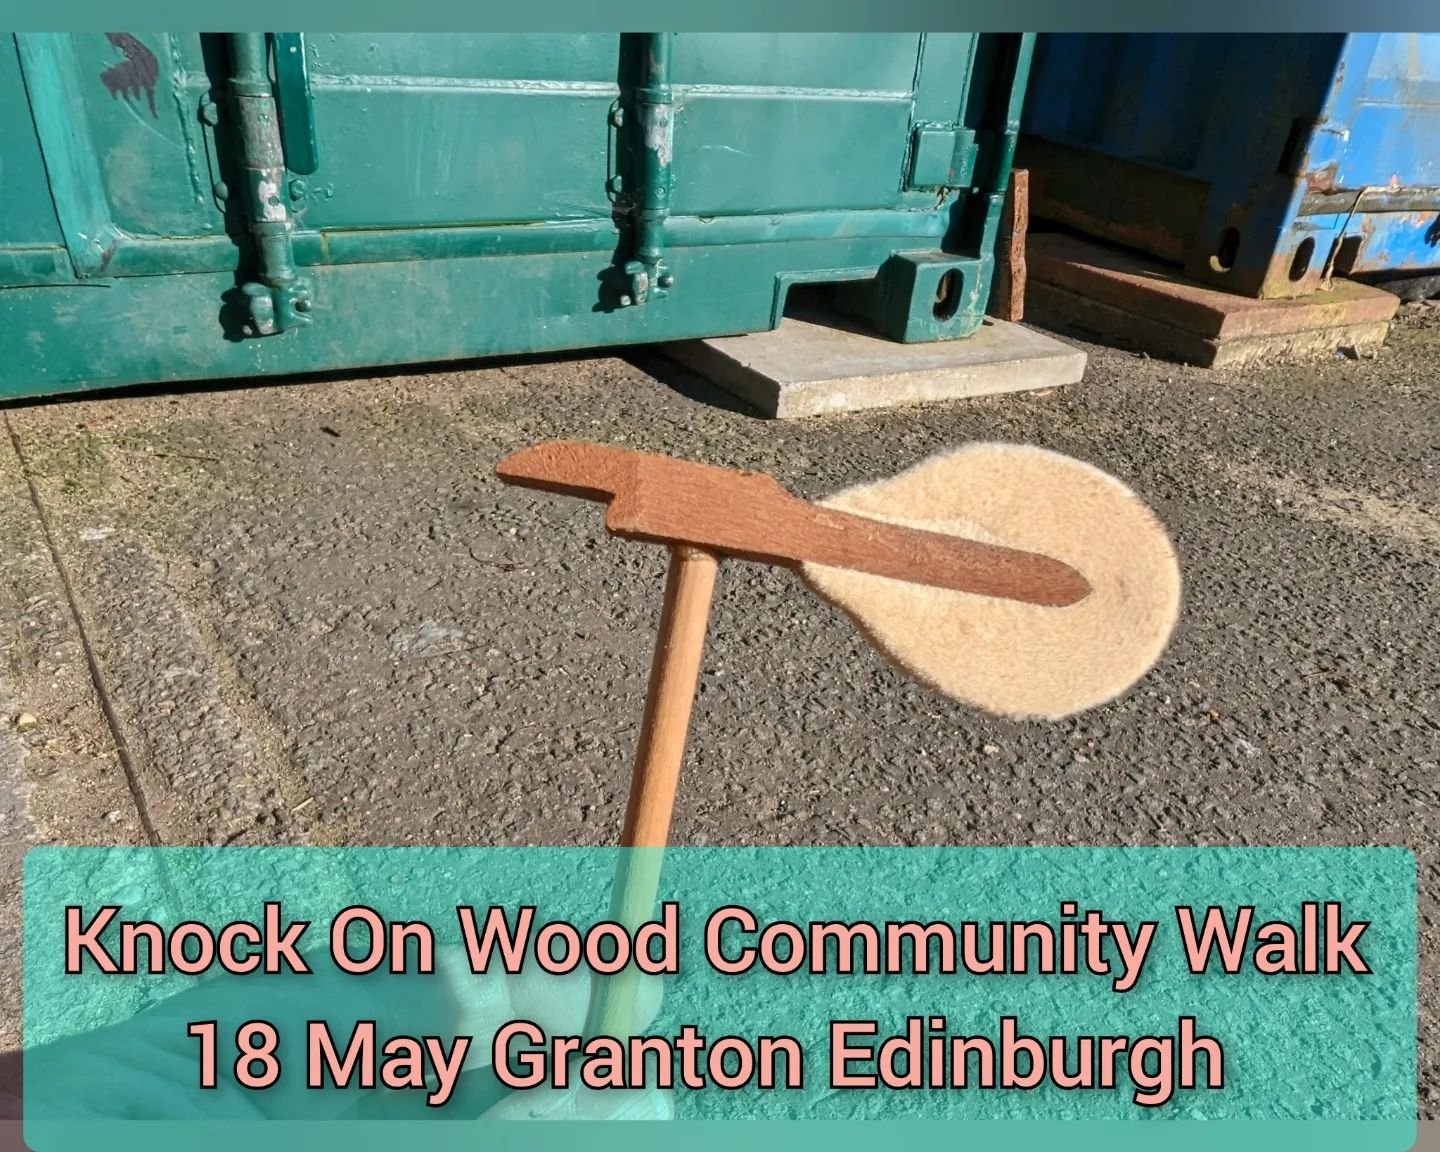 Adapting little hammers from old pianos to Knock on Wood, for the Community Sound Walk on 18 May 1.30-3.30 starting and ending @pianodrome Granton Edinburgh. Thanks to Tom Nelson for his patience and tutoring with the Band Saw.

To choose wood that w